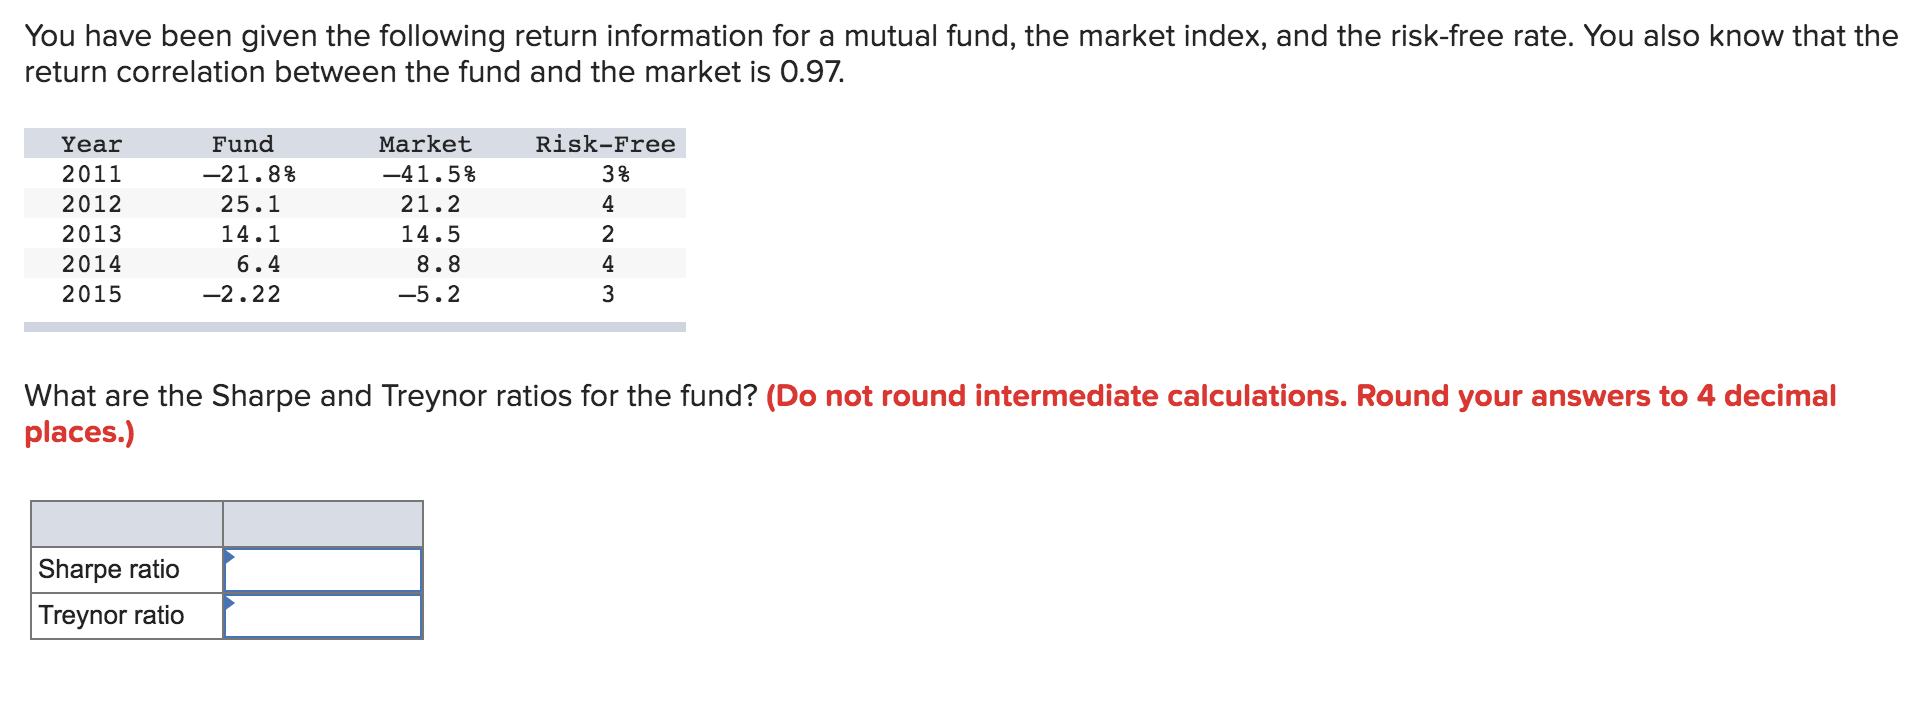 You have been given the following return information for a mutual fund, the market index, and the risk-free rate. You also know that the
return correlation between the fund and the market is 0.97.
1ITT
Market
Risk-Free
Year
Fund
2011
-21.8%
-41.5%
3%
2012
25.1
21.2
4
14.1
2013
14.5
8.8
2014
6.4
4
-2.22
2015
-5.2
What are the Sharpe and Treynor ratios for the fund? (Do not round intermediate calculations. Round your answers to 4 decimal
places.)
Sharpe ratio
Treynor ratio
